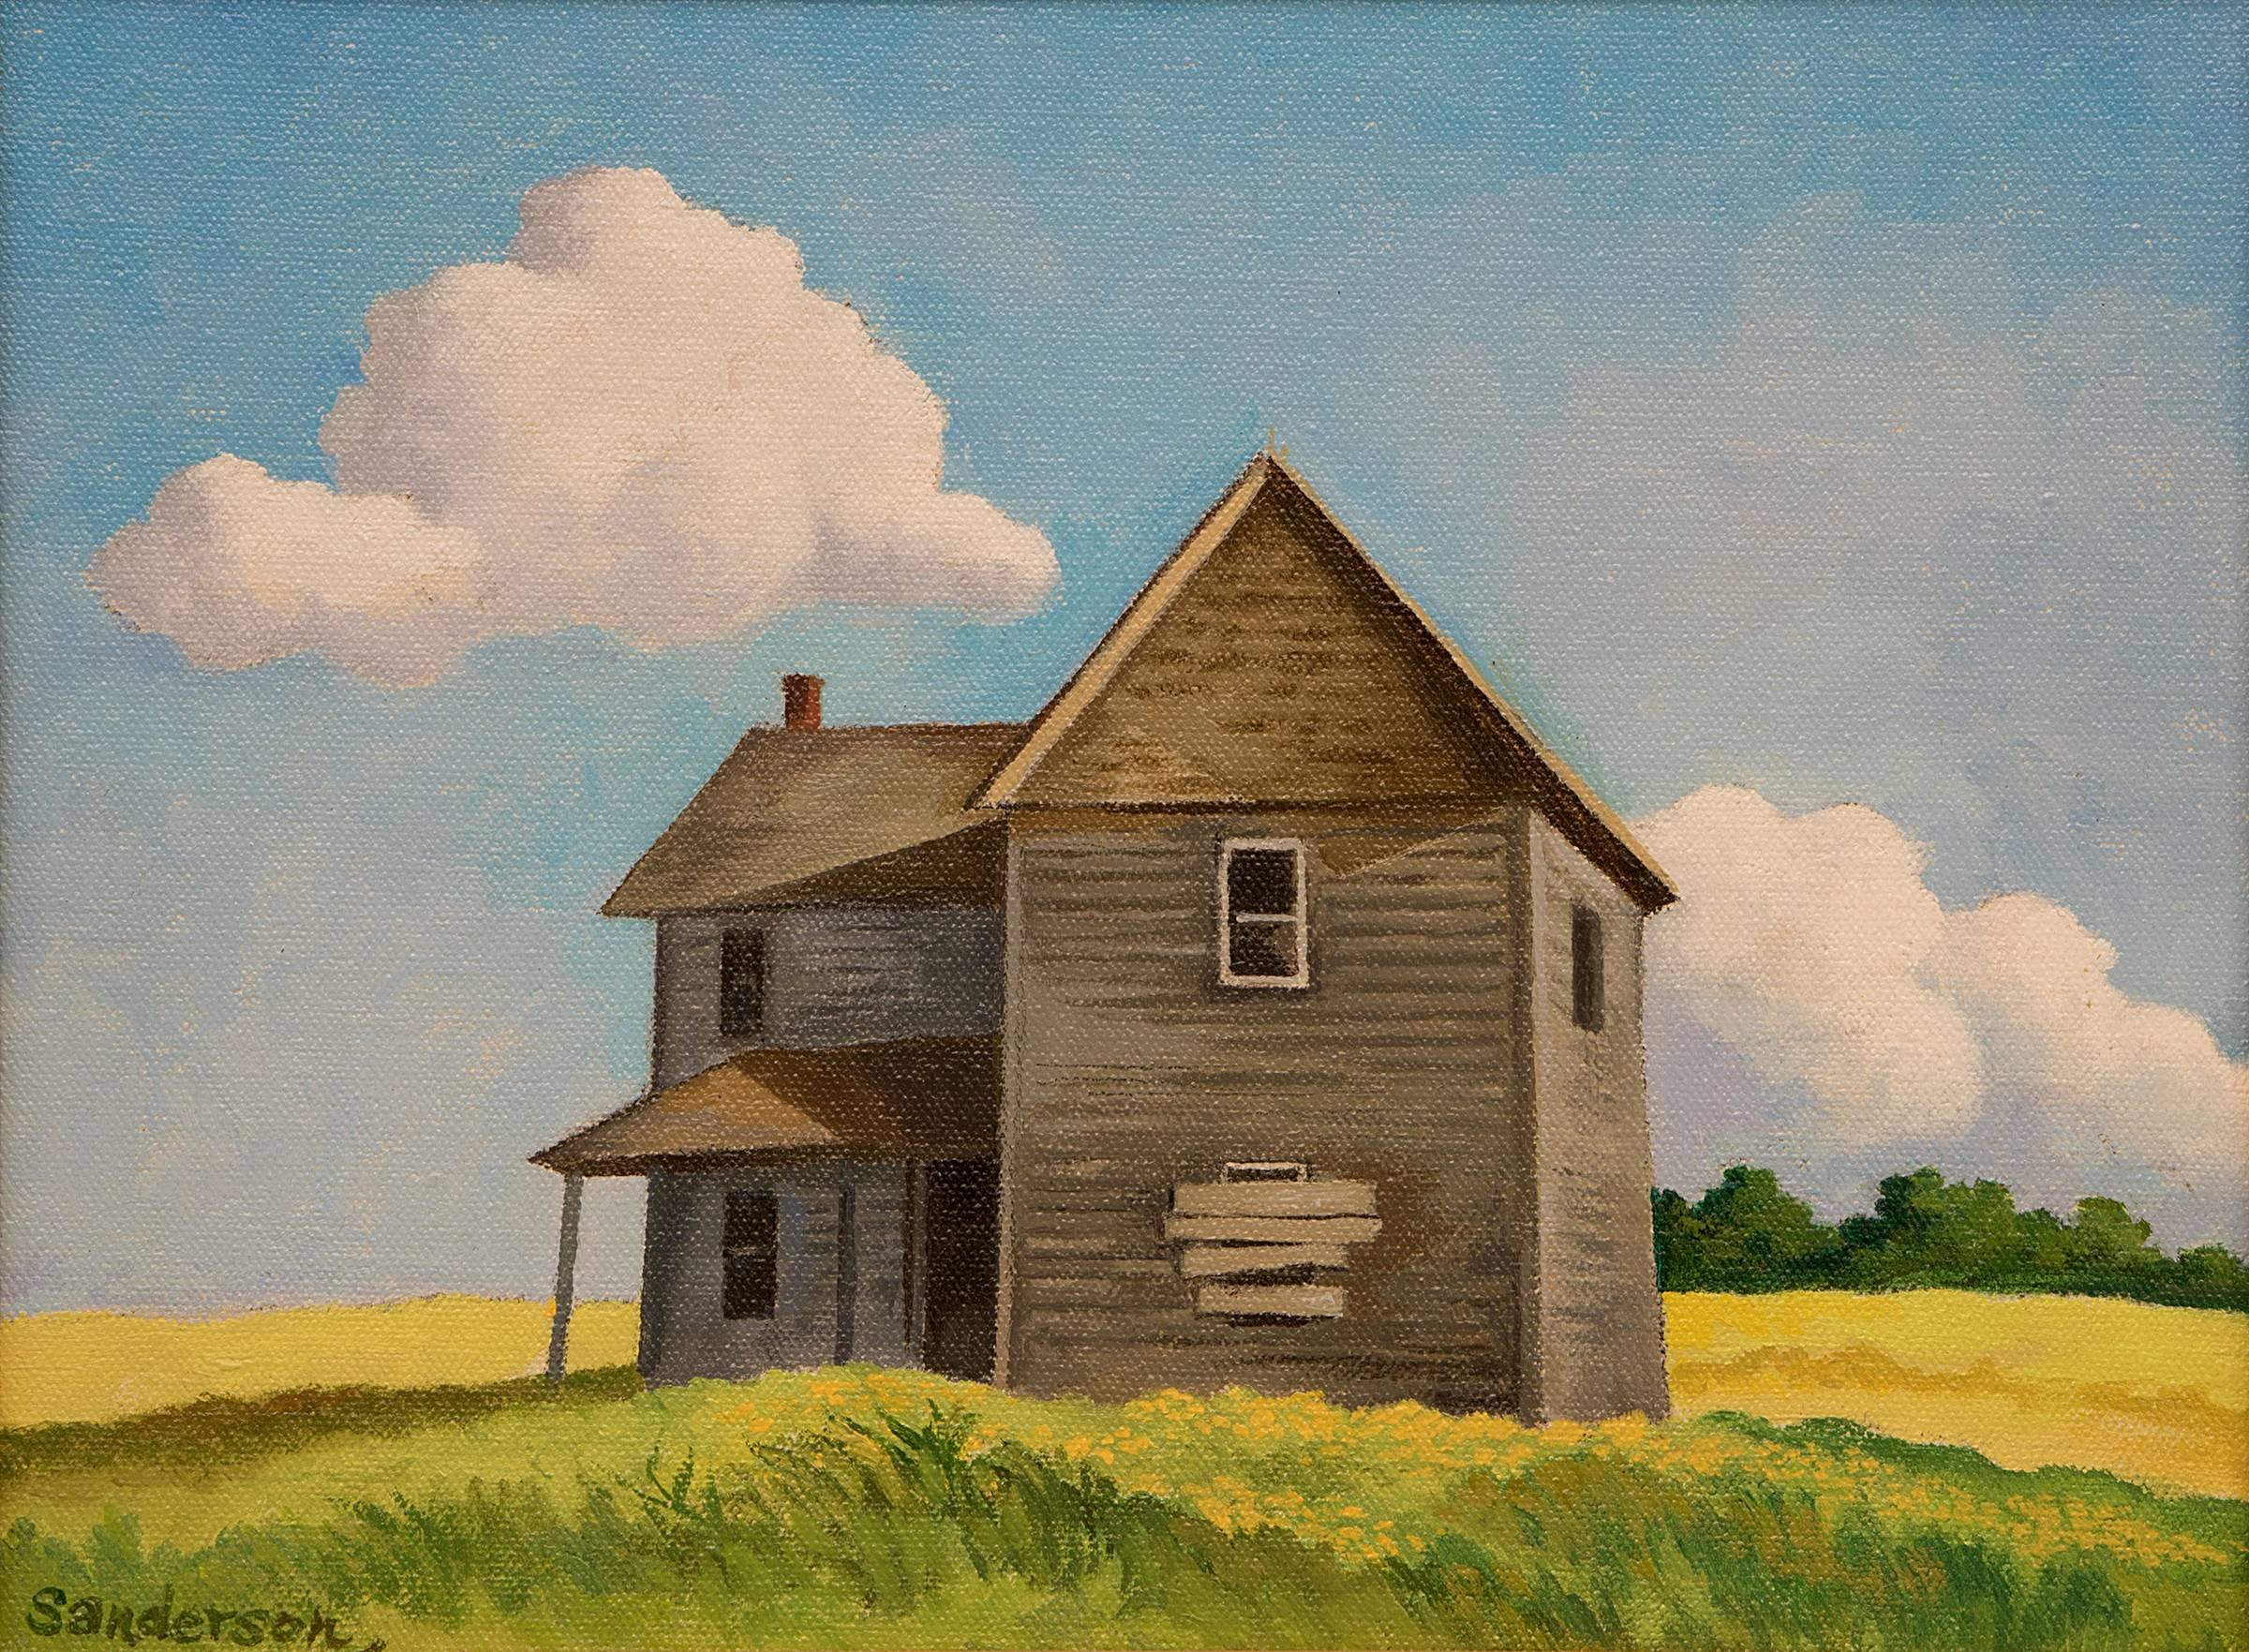 Abandoned (Colorado) - Painting by William Sanderson